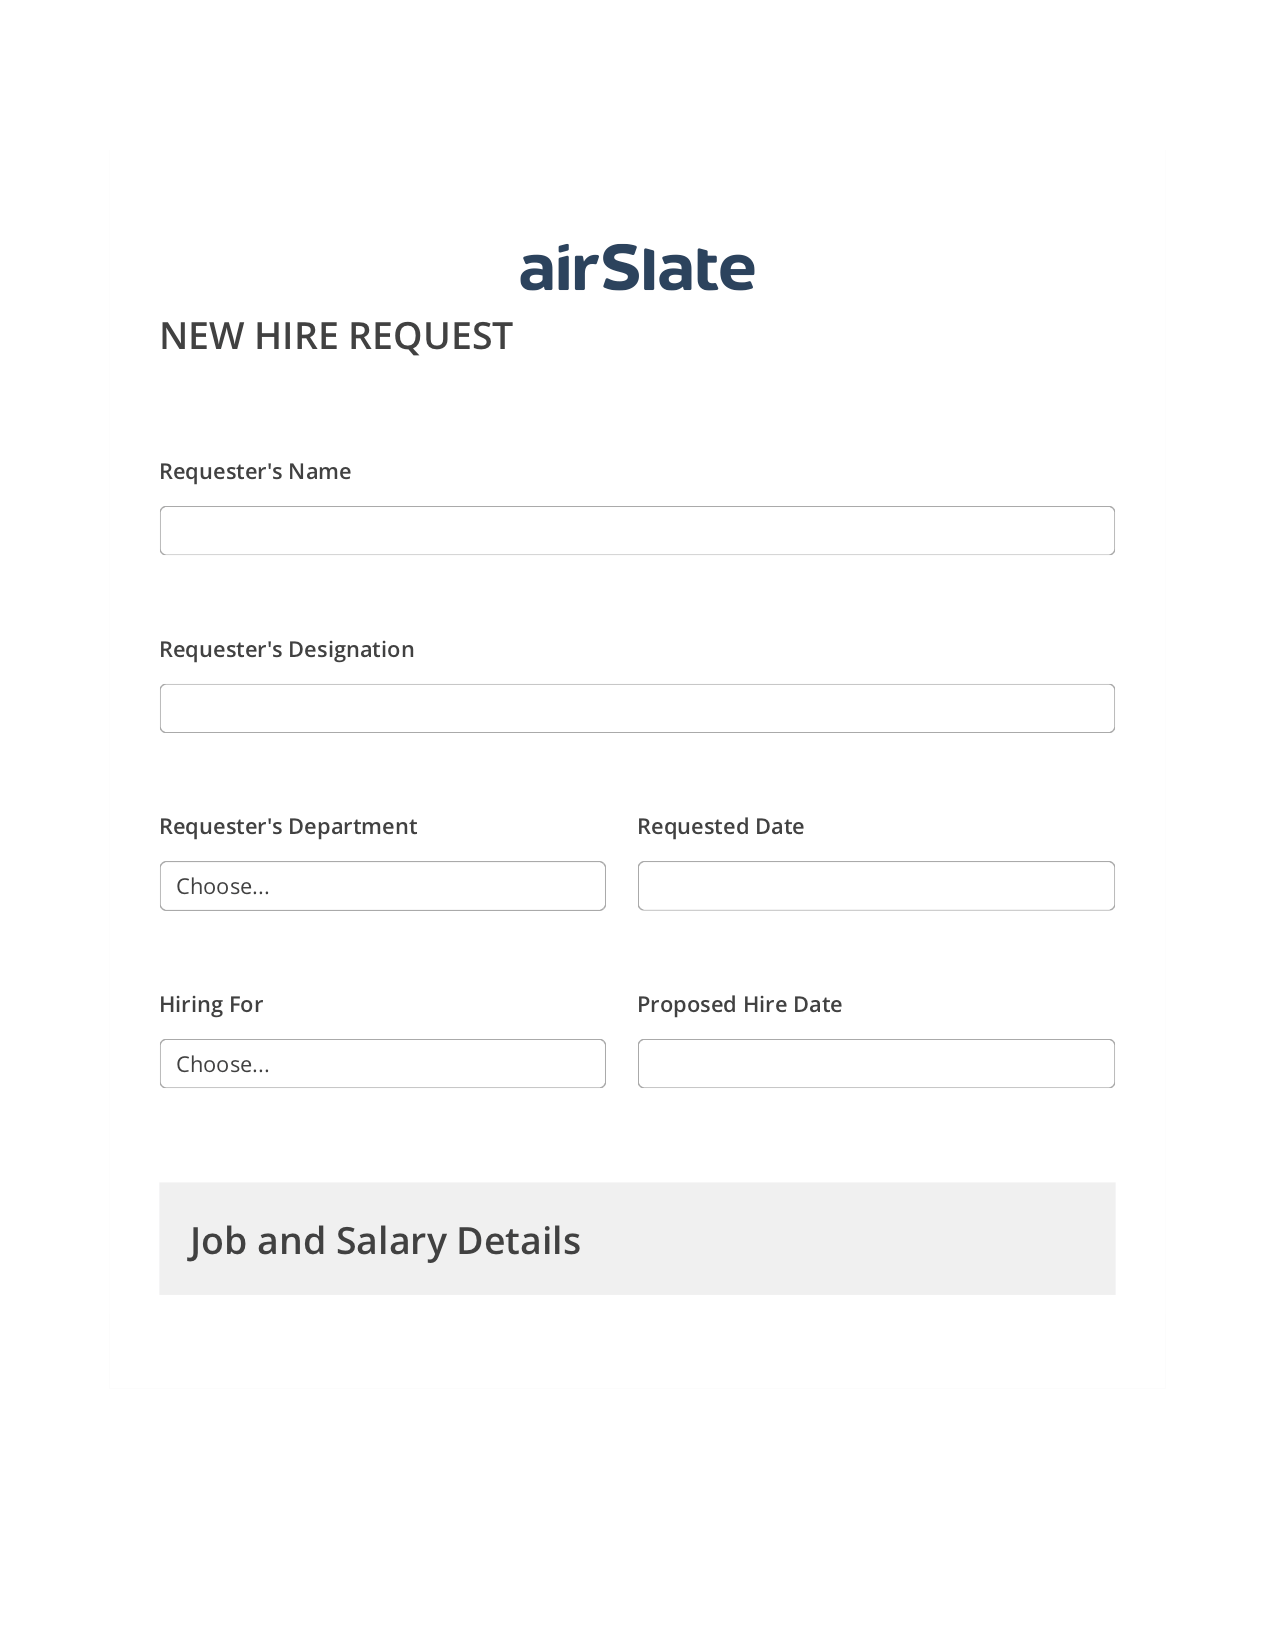 Hiring Request Workflow Pre-fill Document Bot, Reminder Bot, Archive to Box Bot